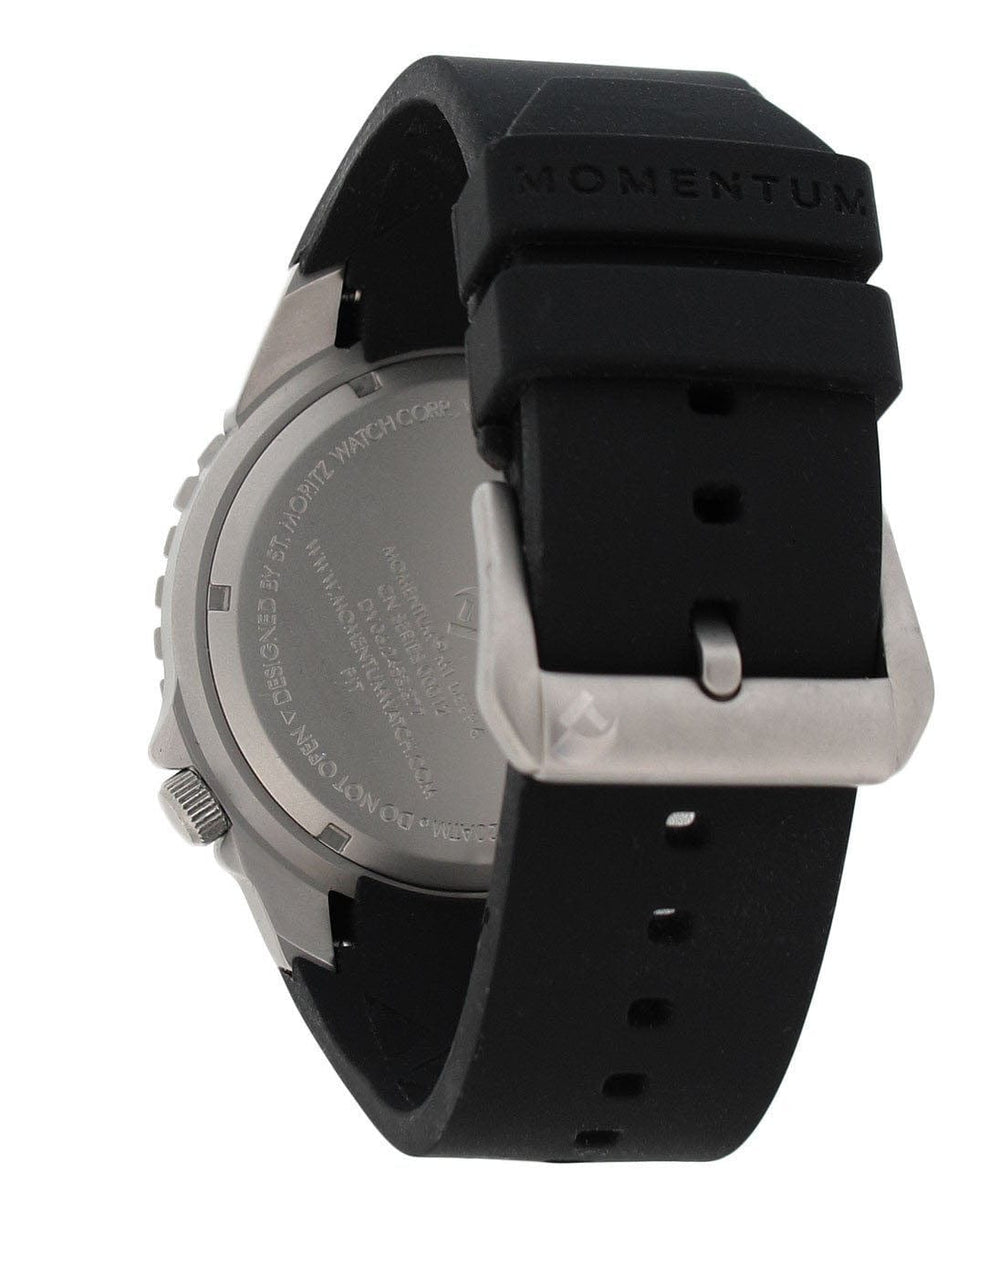 Momentum Momentum Deep 6 in Black Face with Black 'FIT' Rubber Strap by Oyster Diving Shop